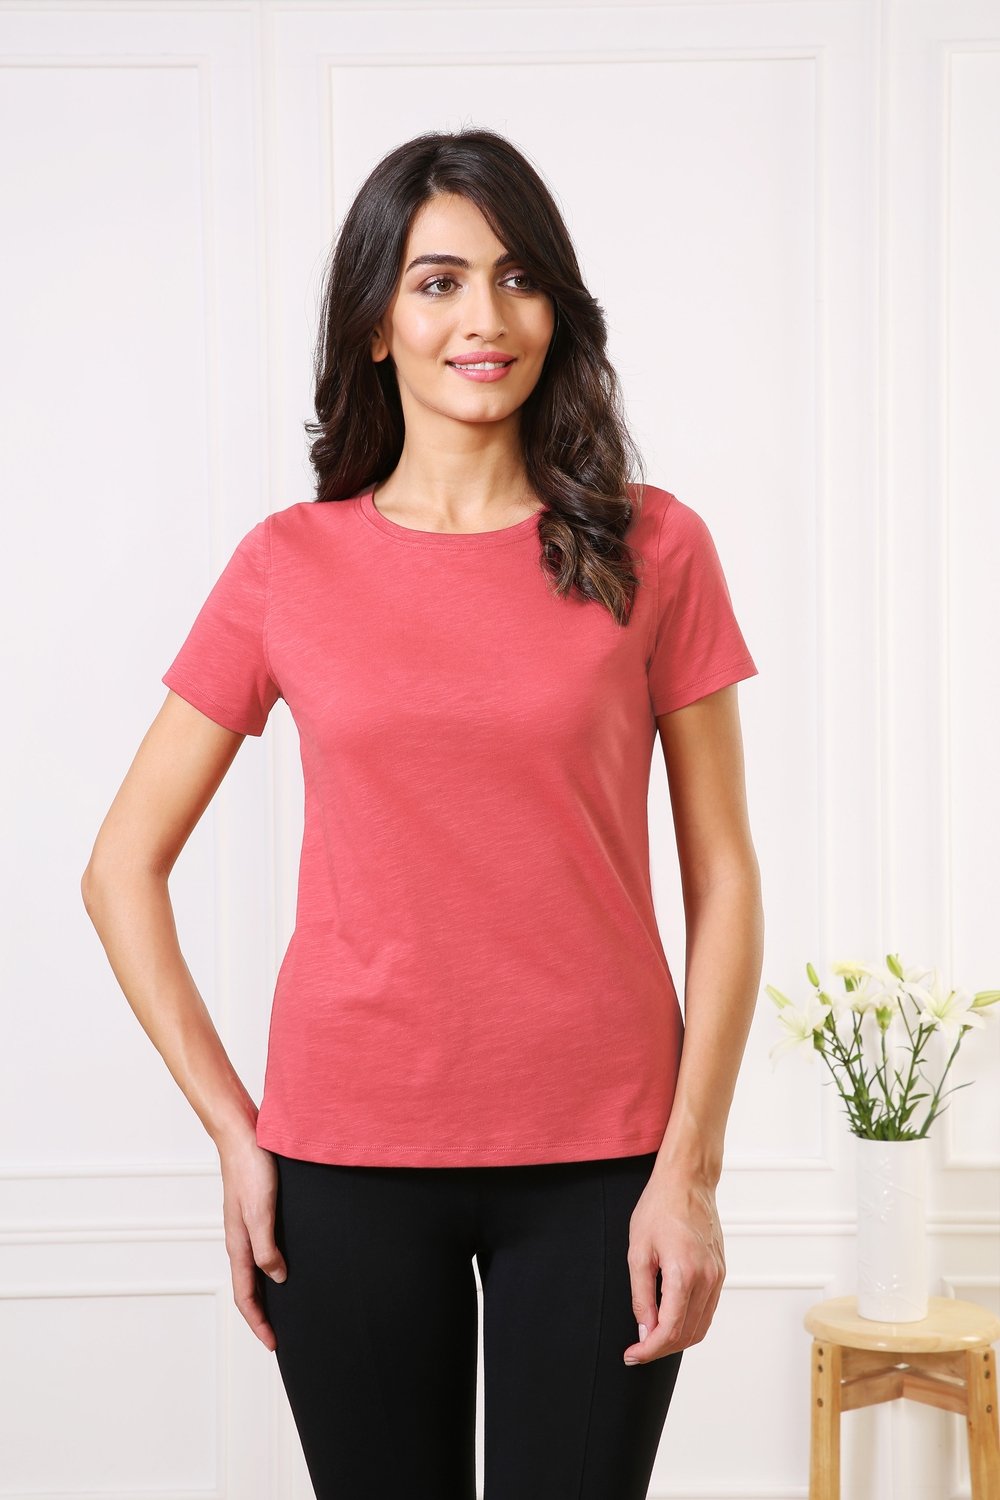 Classic Cotton Every day Wear Pink t-shirt tops for Women - Stilento